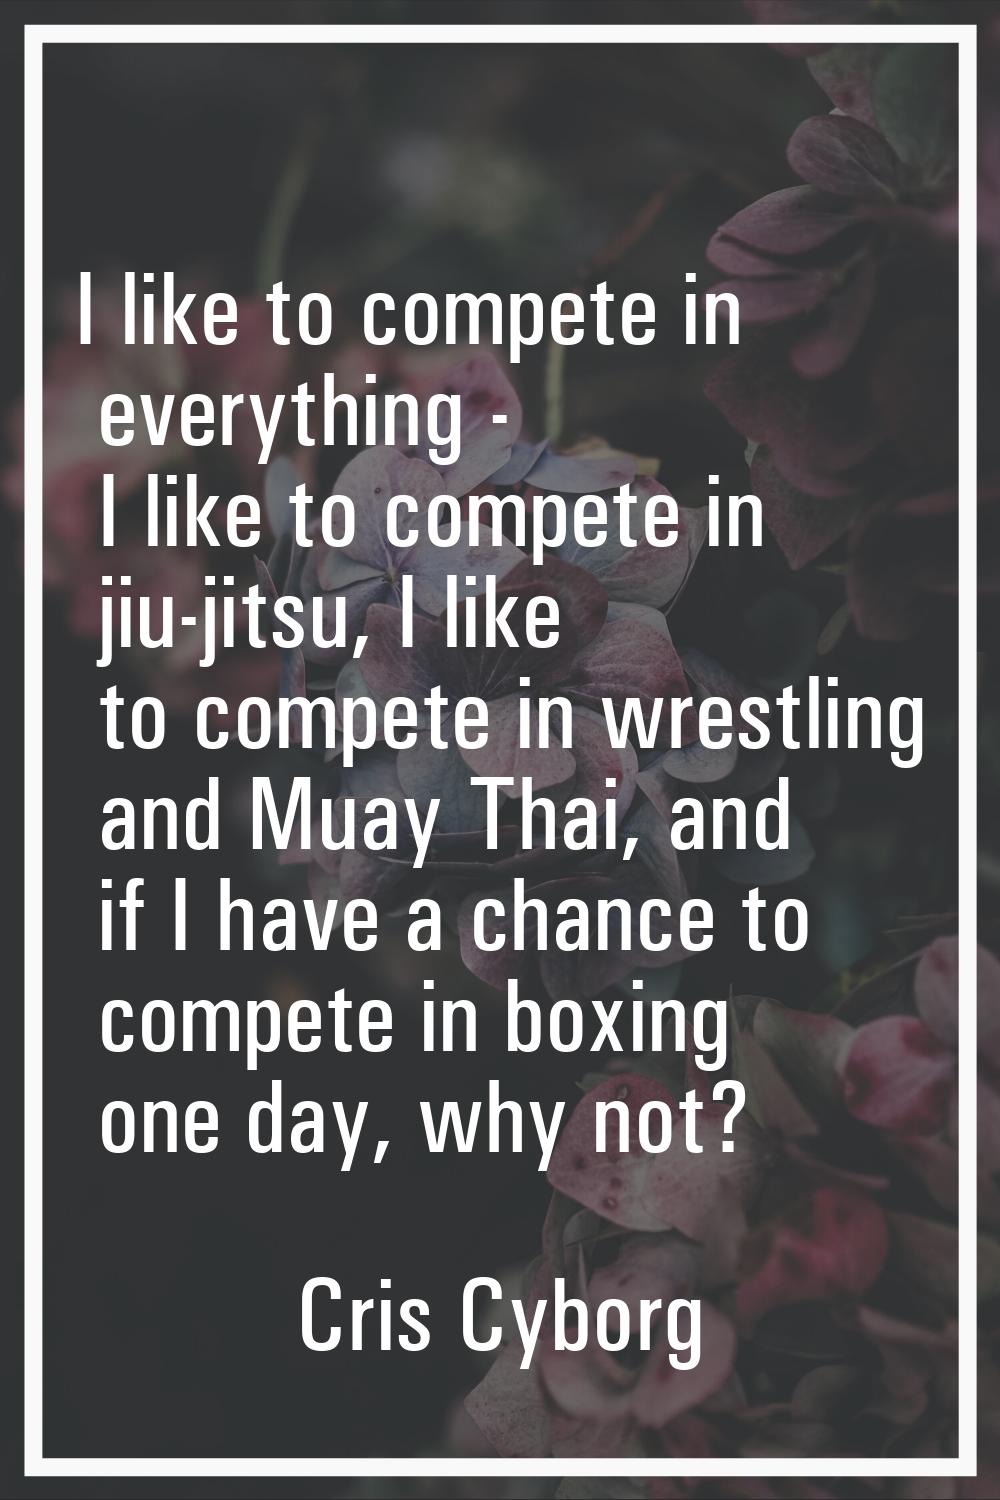 I like to compete in everything - I like to compete in jiu-jitsu, I like to compete in wrestling an